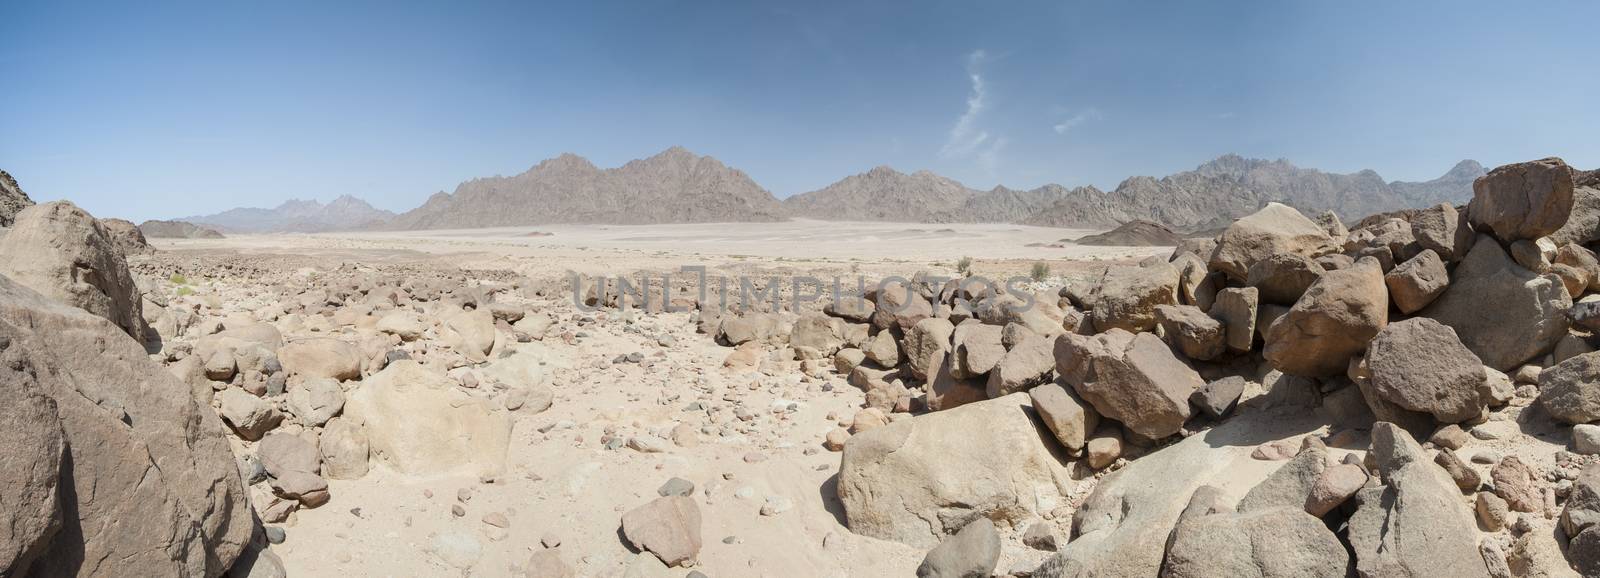 Panorama of rocky mountain slope landscape in an arid desert environment